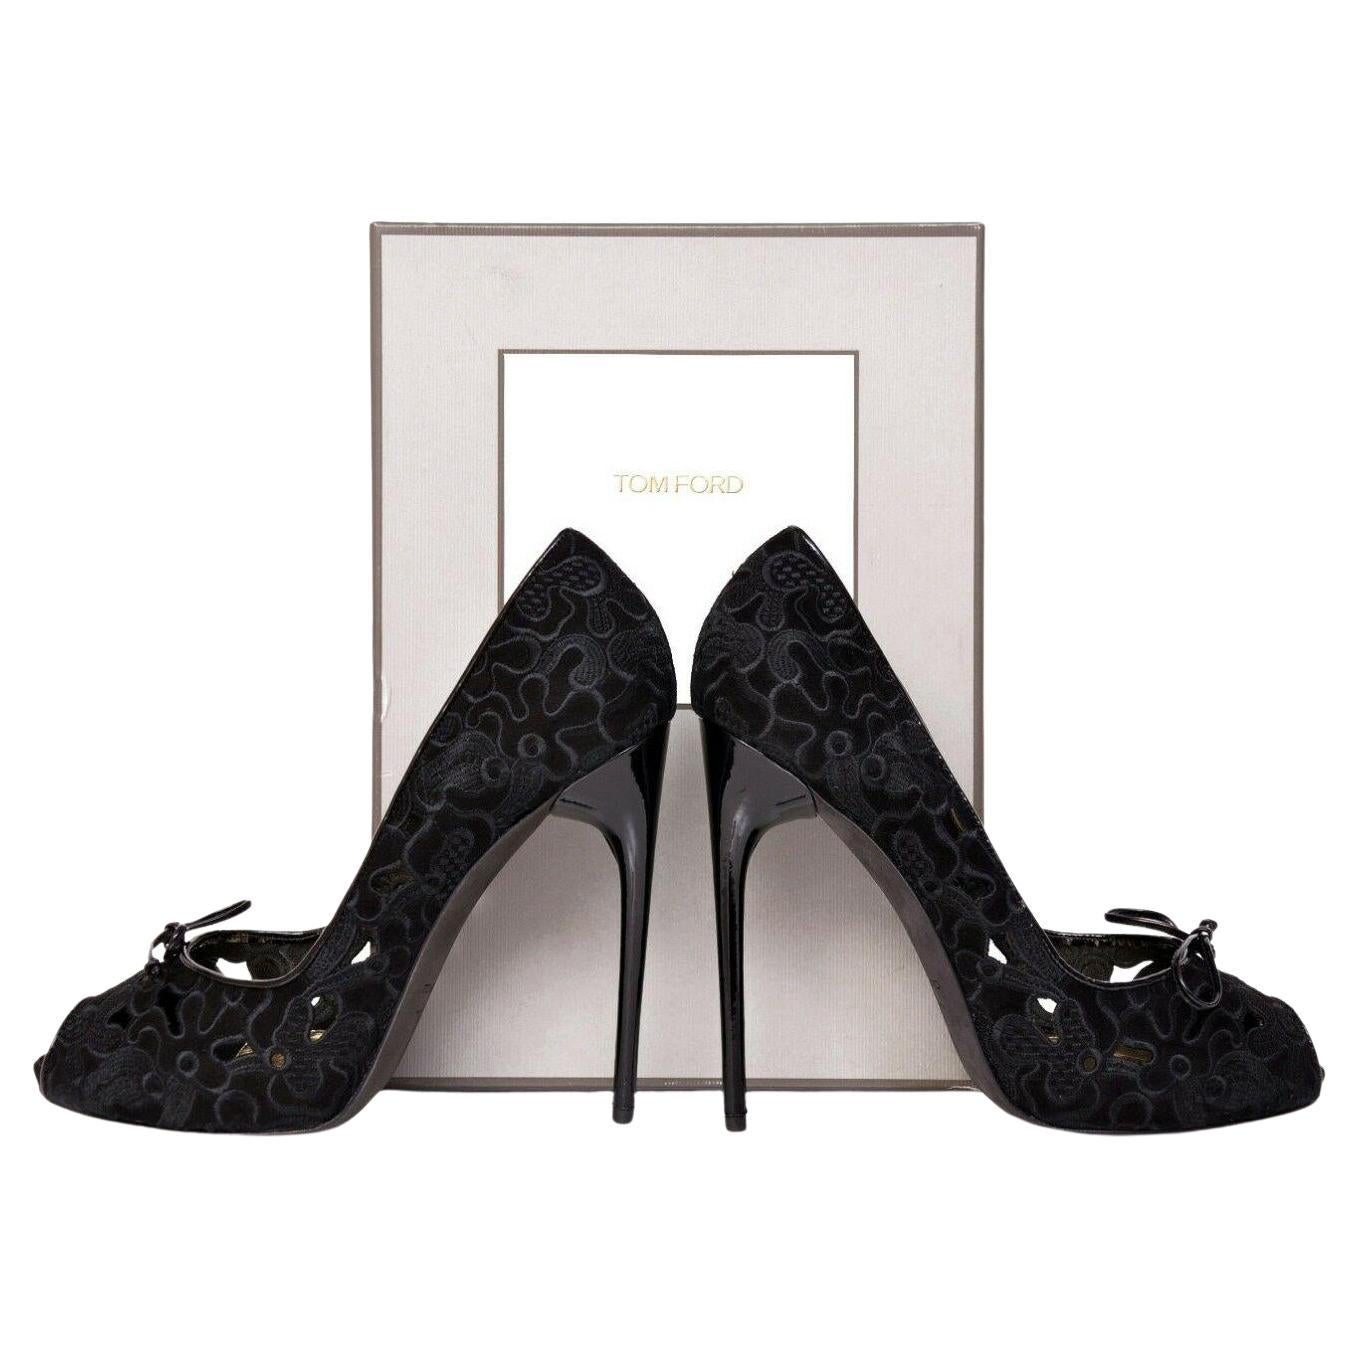 Tom Ford Embroidered and Cut-Out Suede Leather Shoes 41 - 11 NWT For Sale